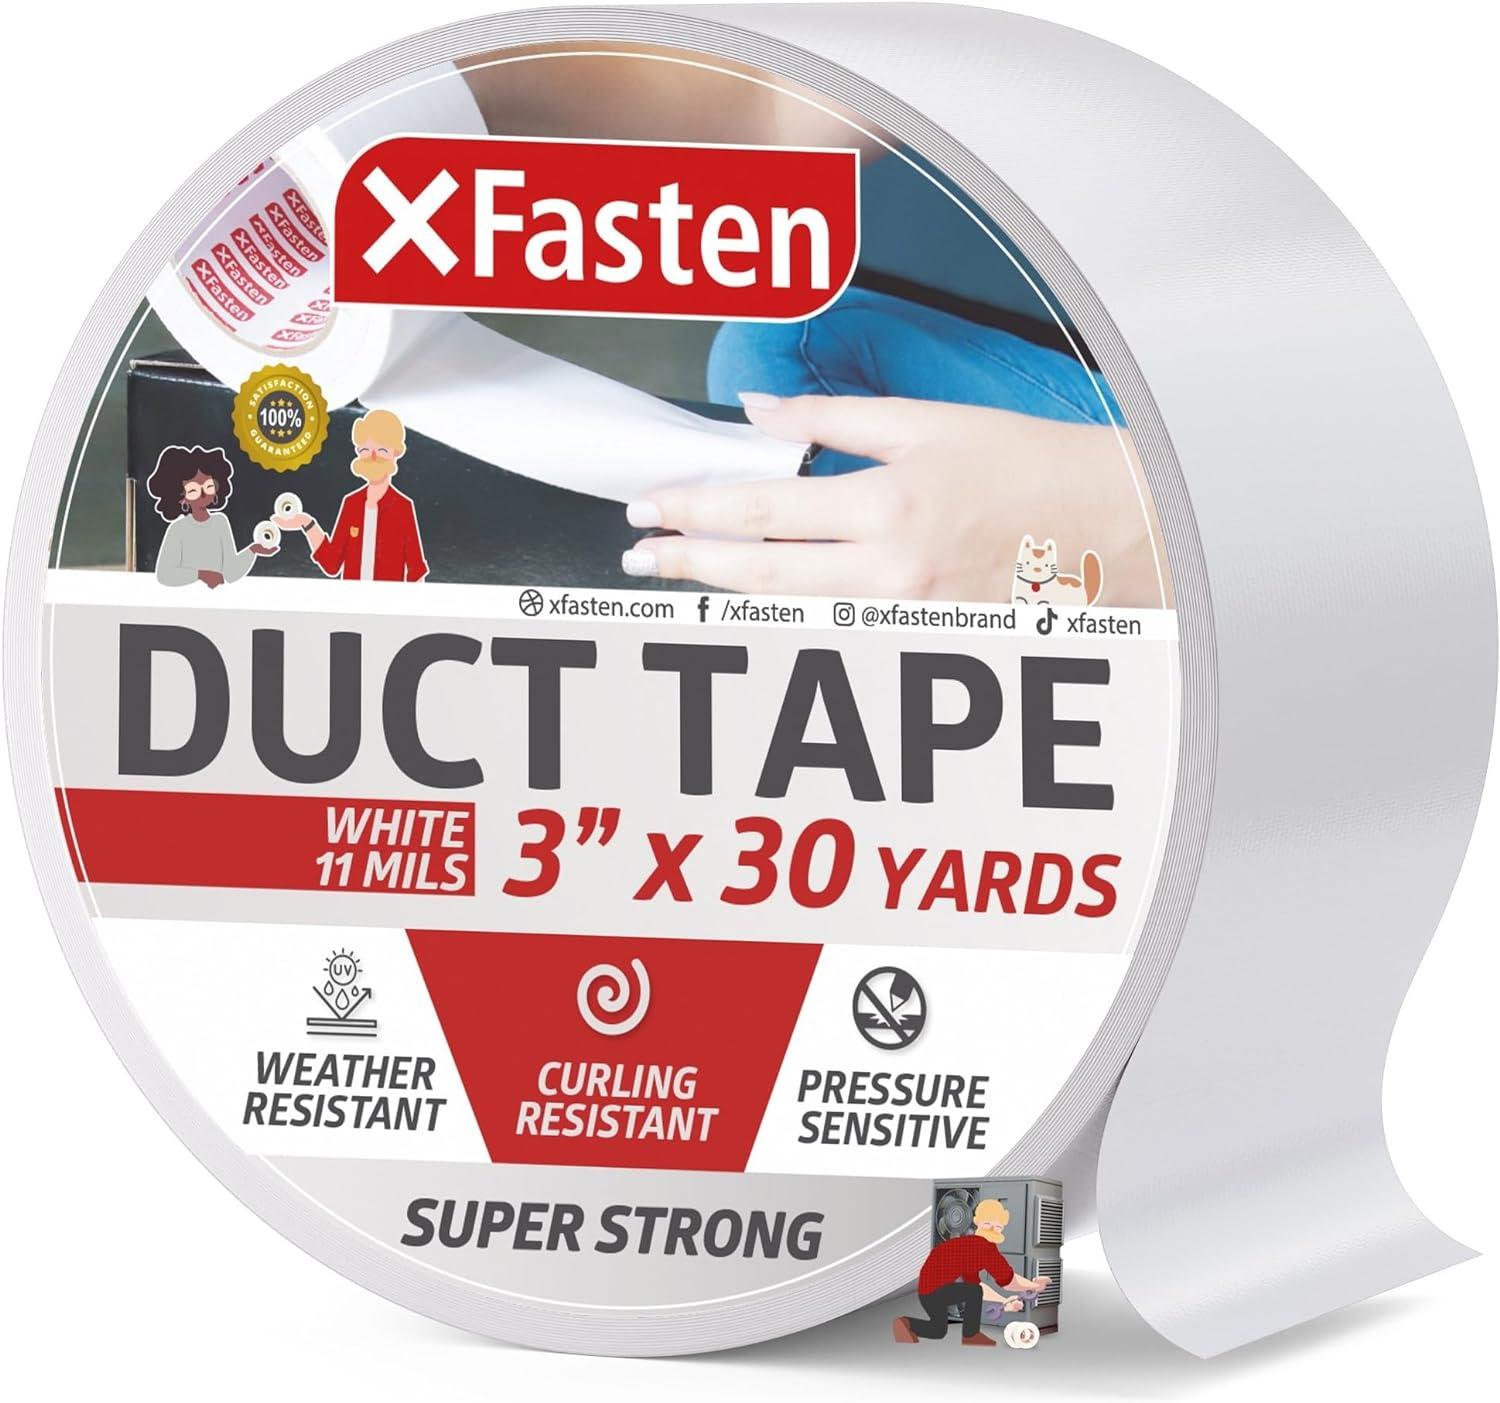 xfasten super strong duct tape white 3